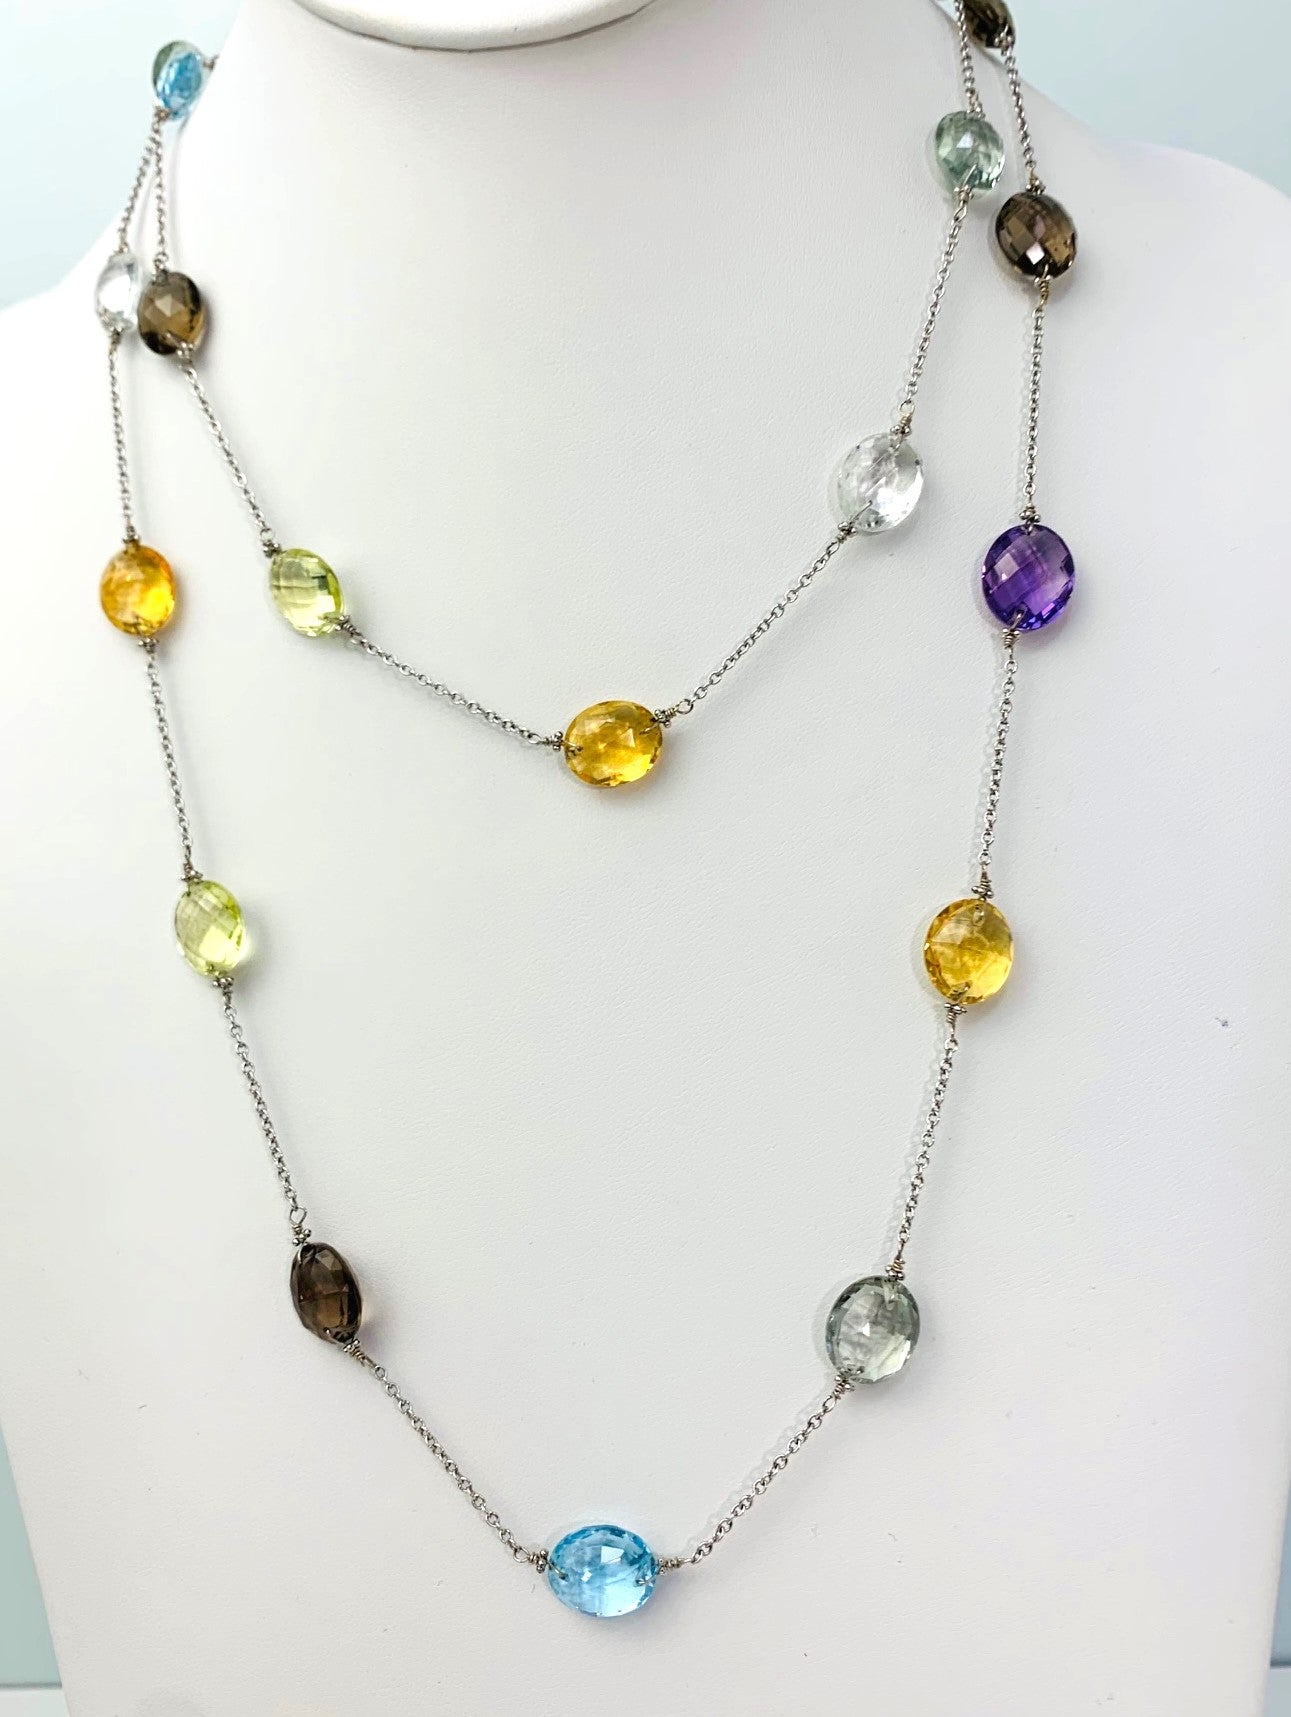 42" 20 Station Multicolored Oval Rose Cut Gemstone Necklace in 14KW - NCK-347-TNCGM14W-MLTI-42